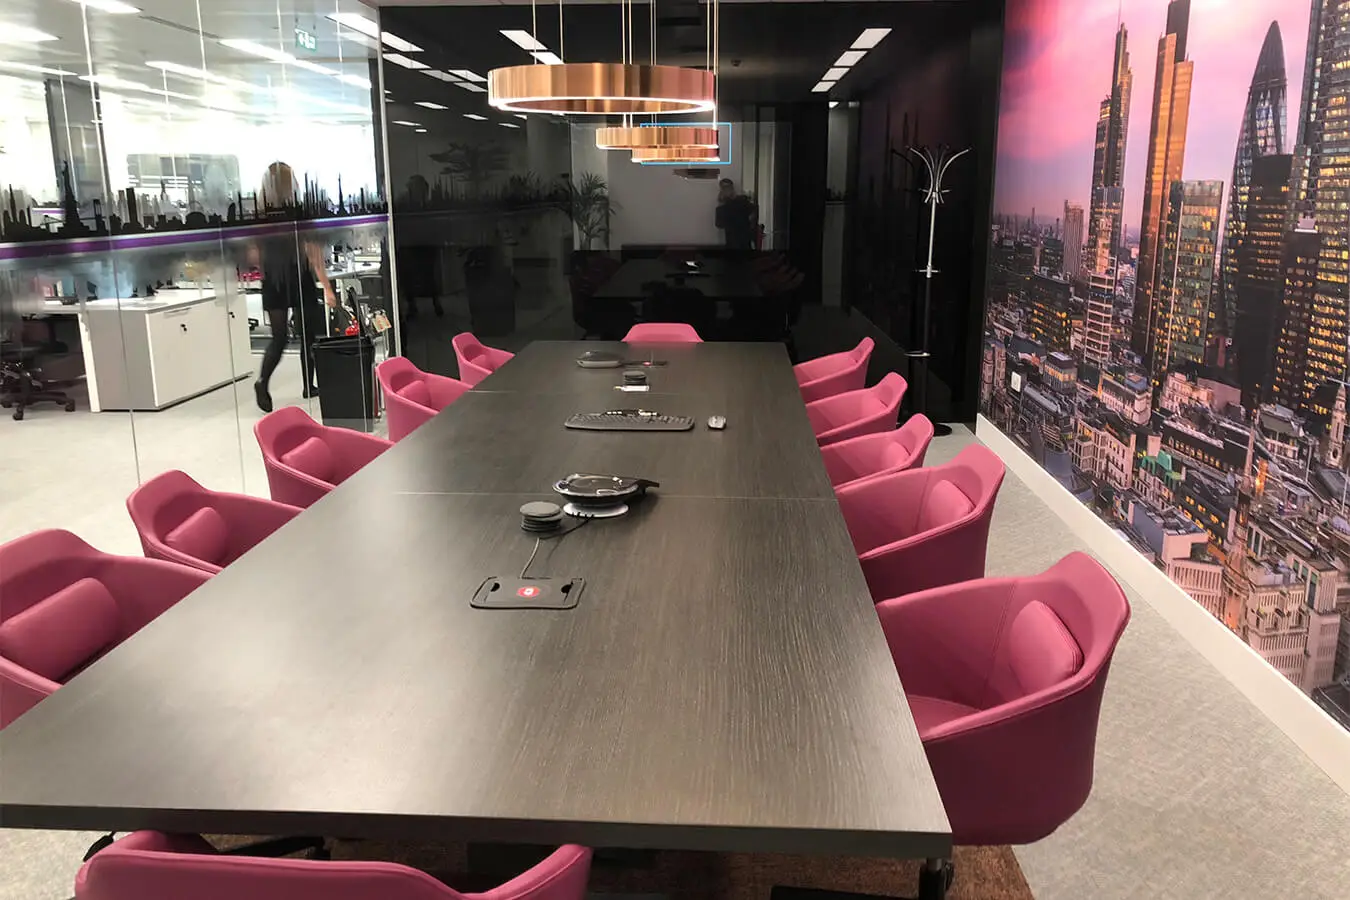 Office meeting space with designer table and chairs